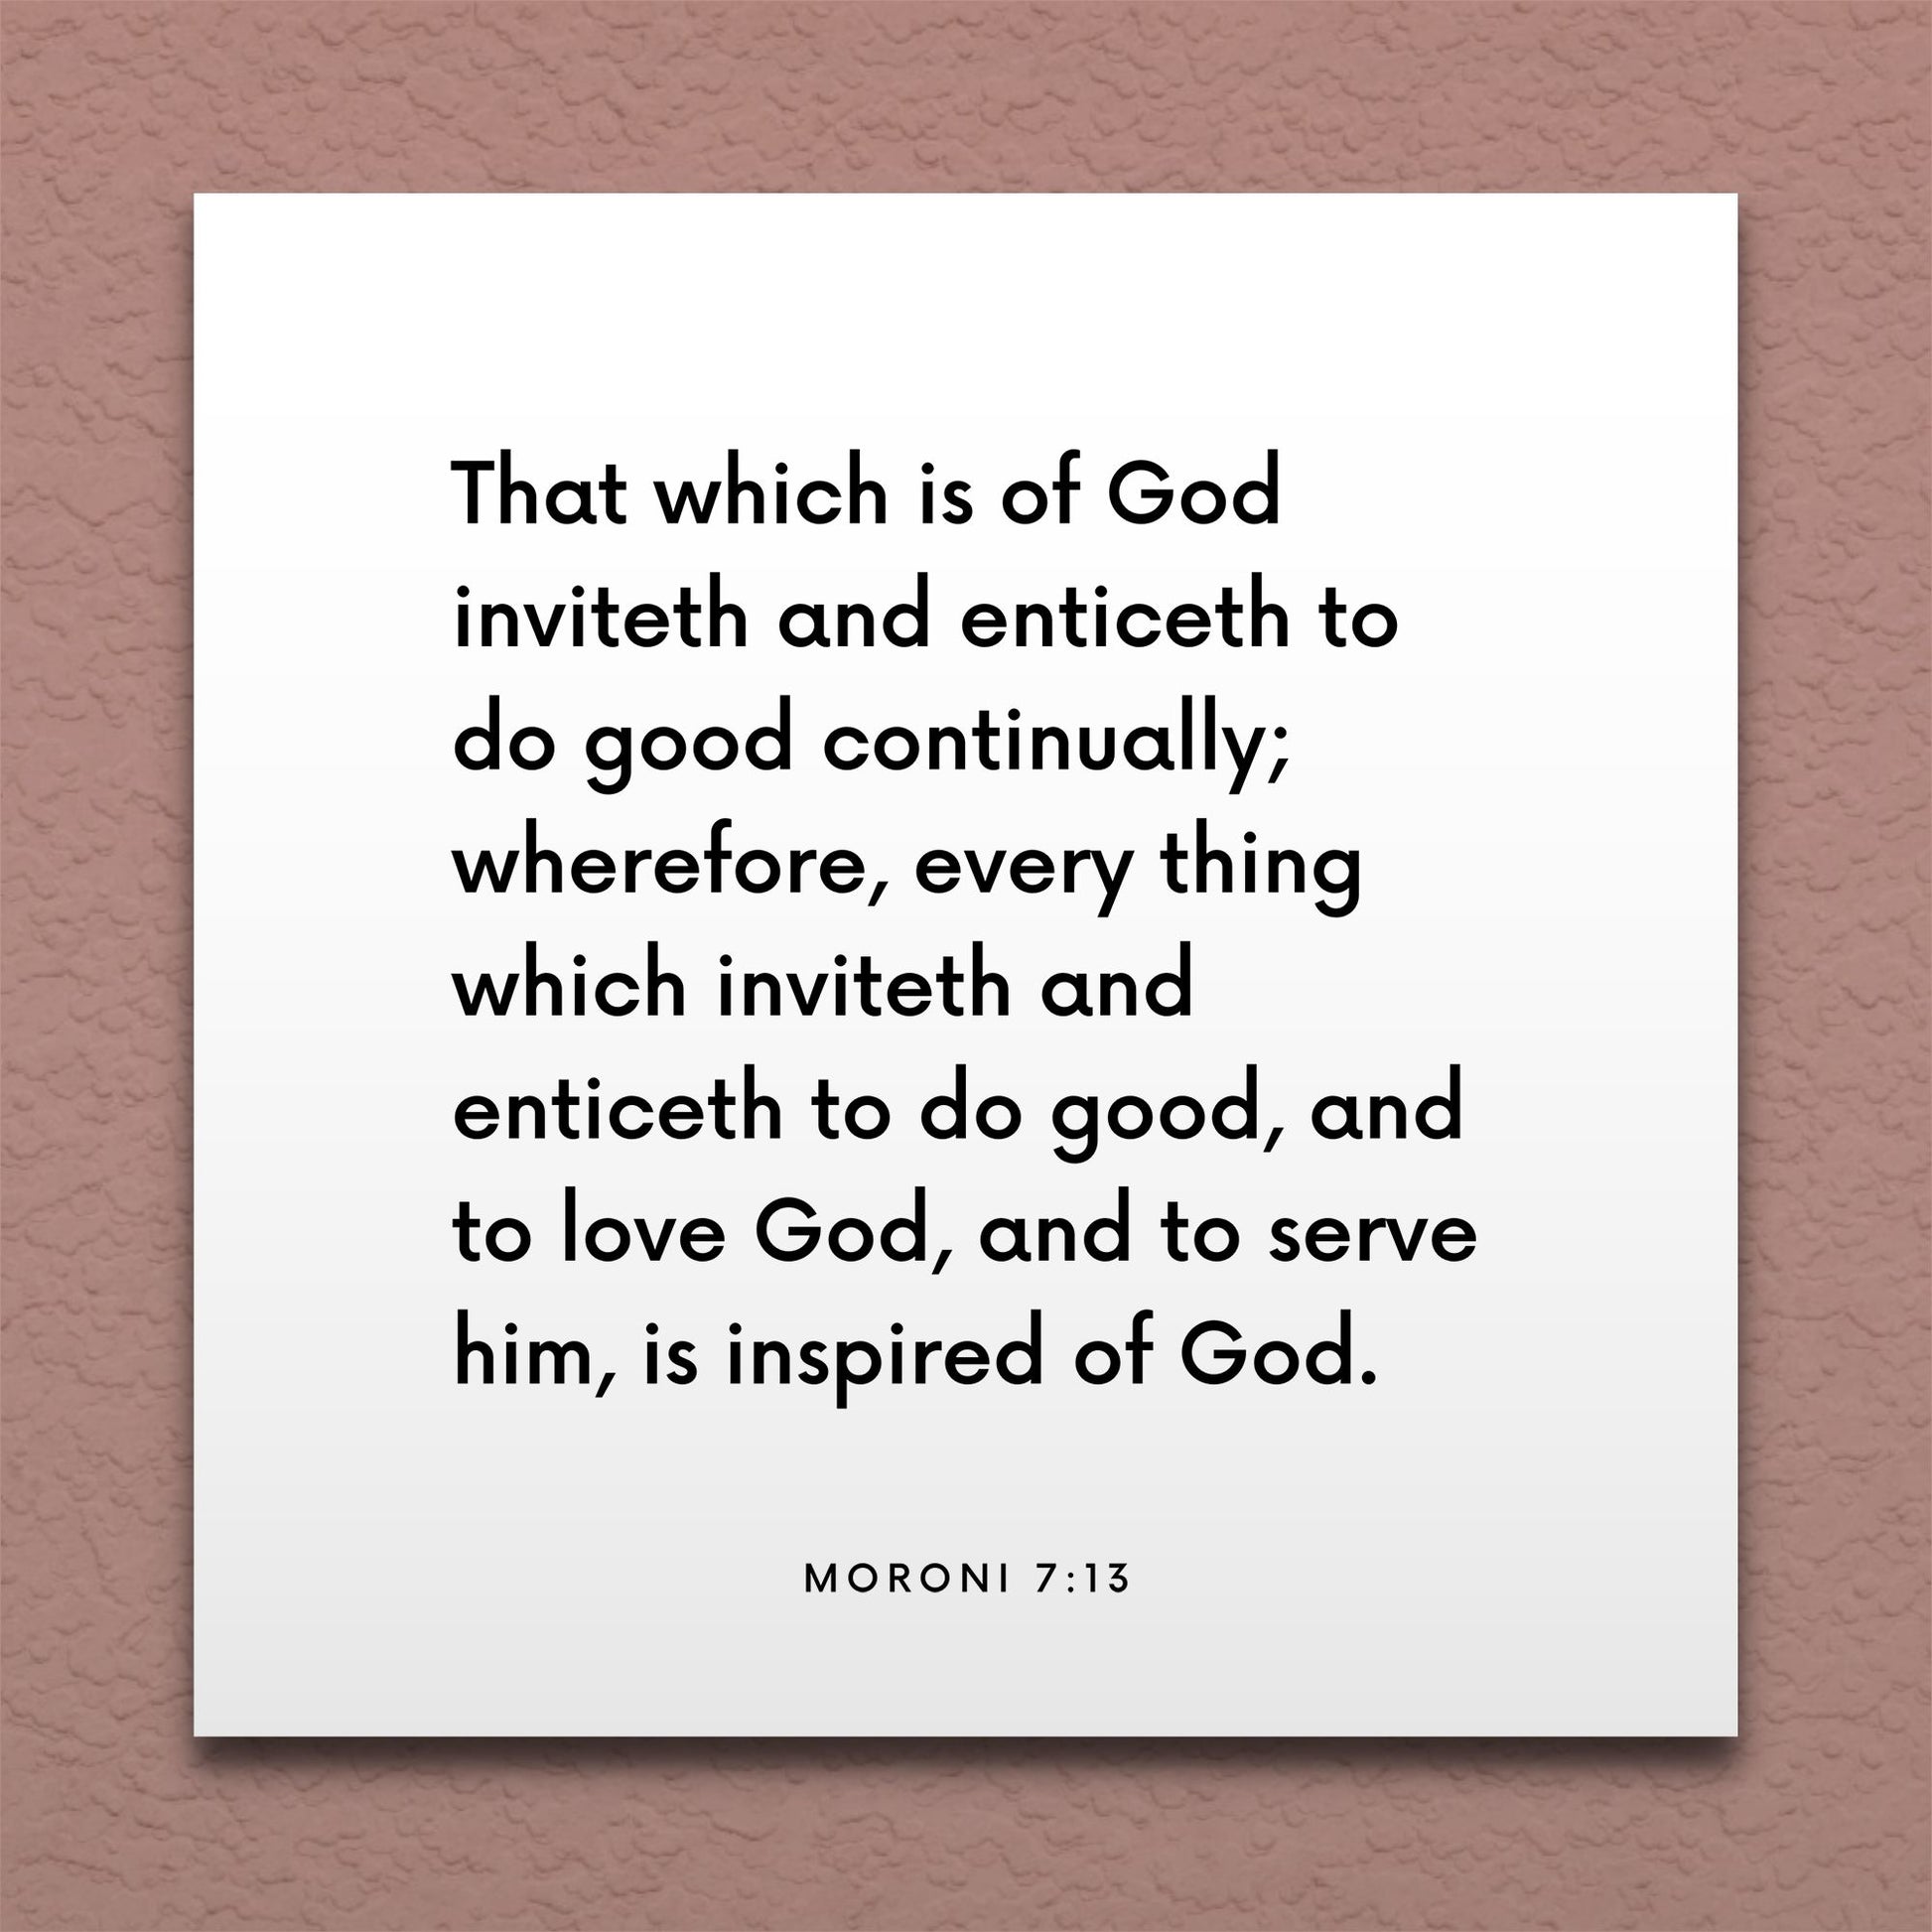 Wall-mounted scripture tile for Moroni 7:13 - "Every thing which inviteth and enticeth to do good"